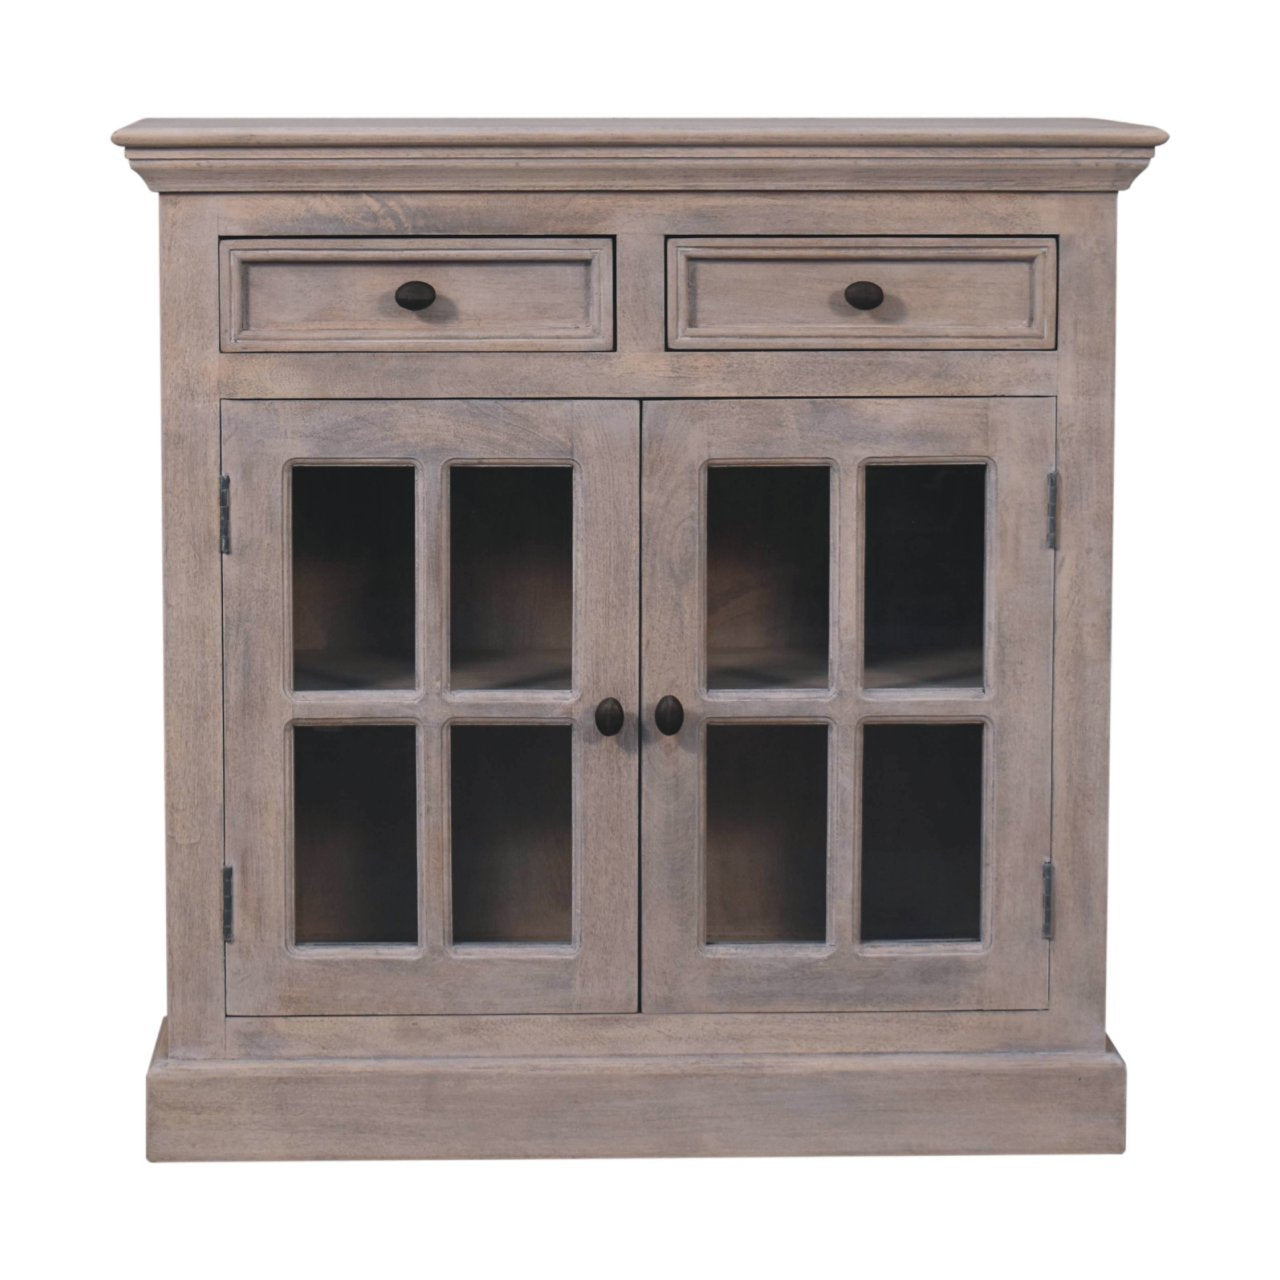 View Stone Finish Cabinet with Glazed Doors information